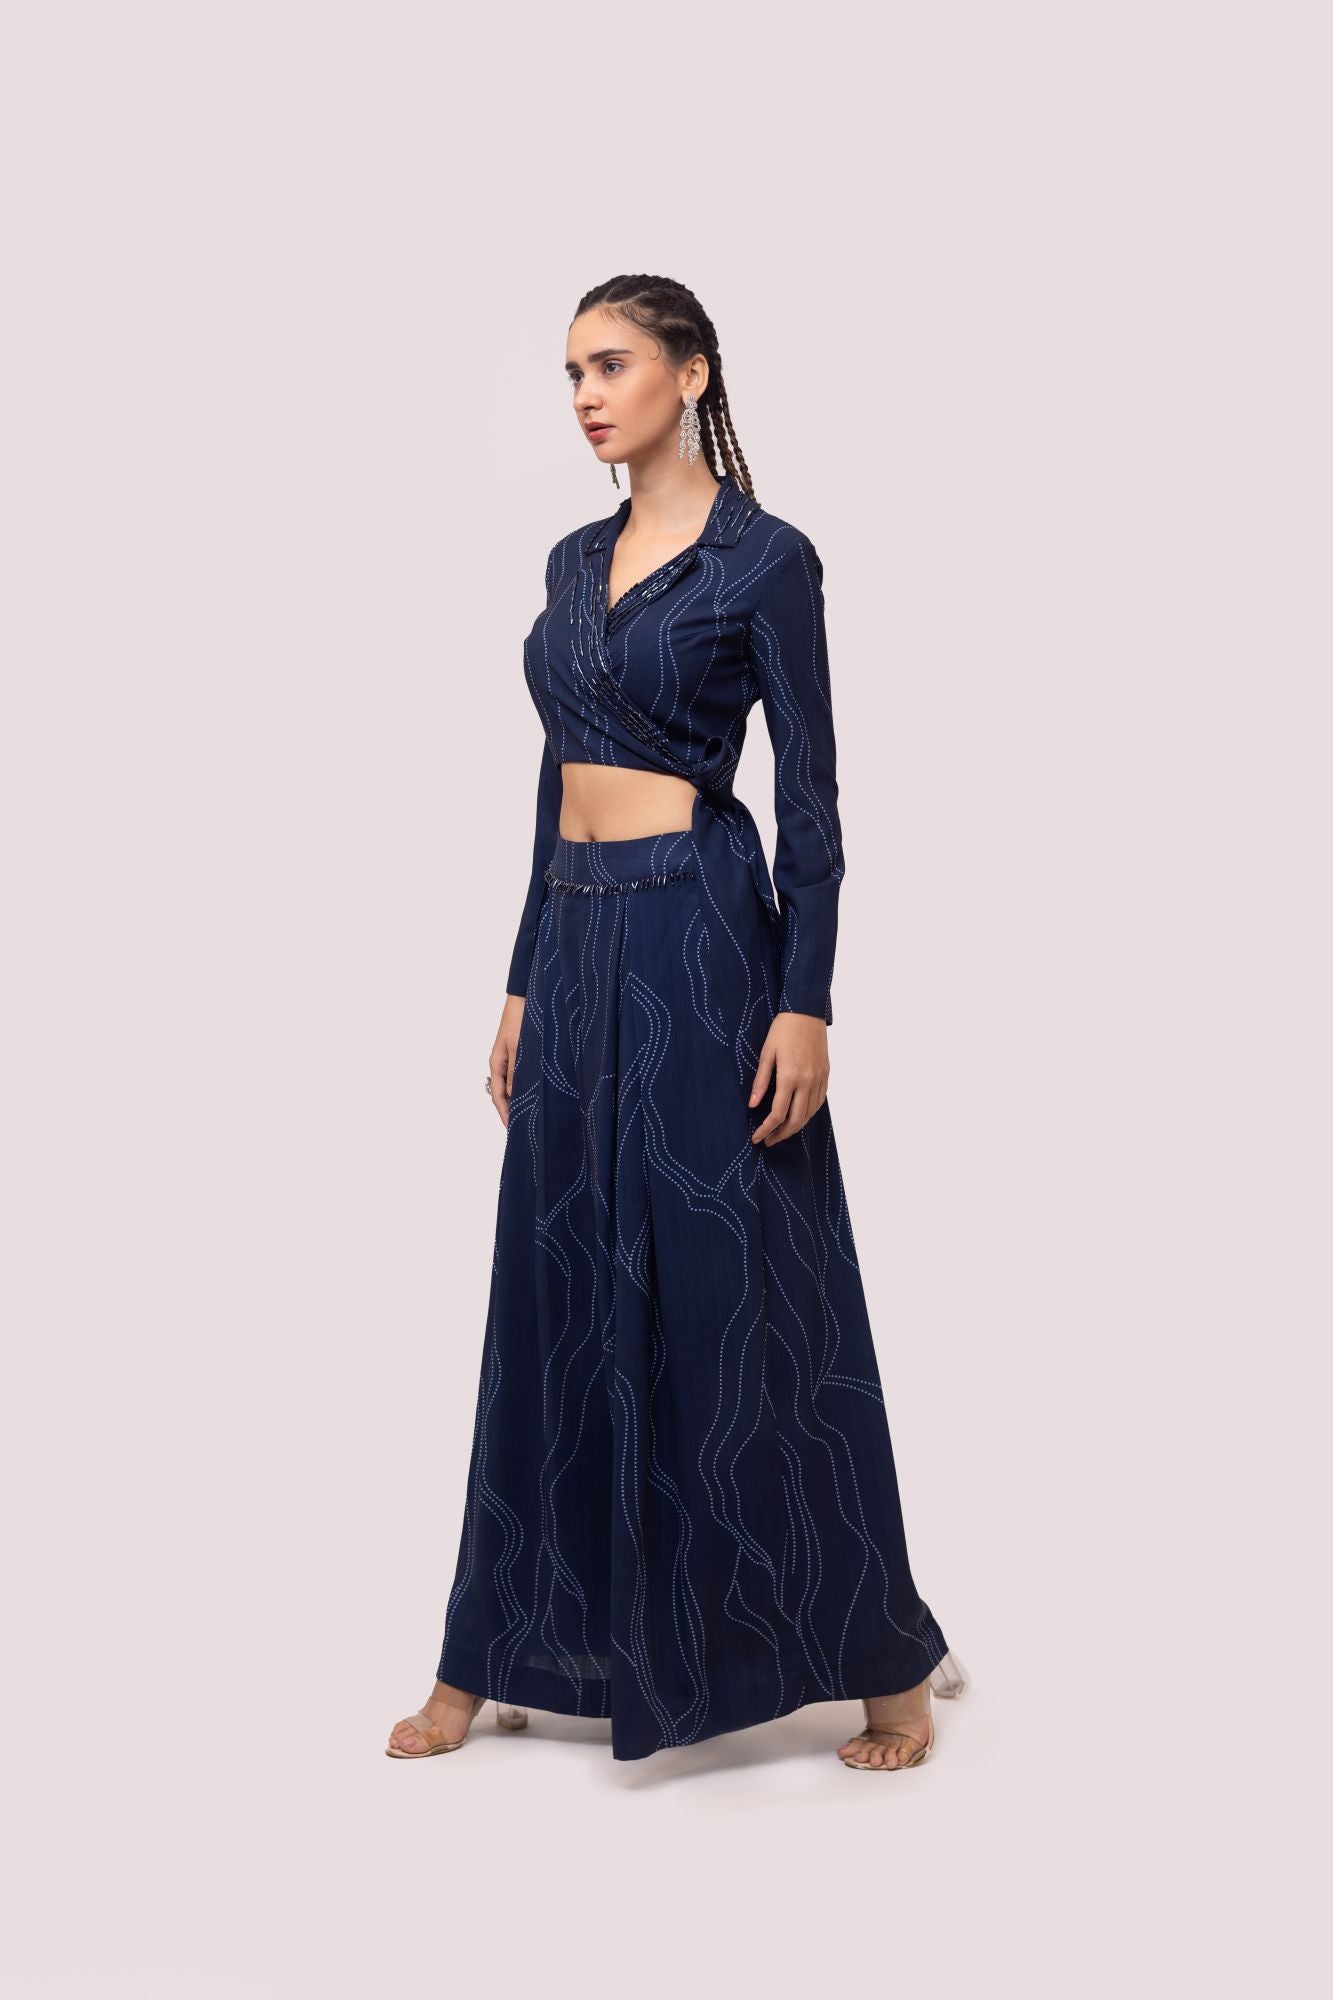 Buy navy blue embellished printed Kota print co-ord set online in USA. Shop the best and latest designs in embroidered sarees, designer sarees, Anarkali suit, lehengas, sharara suits for weddings and special occasions from Pure Elegance Indian fashion store in USA.-left side